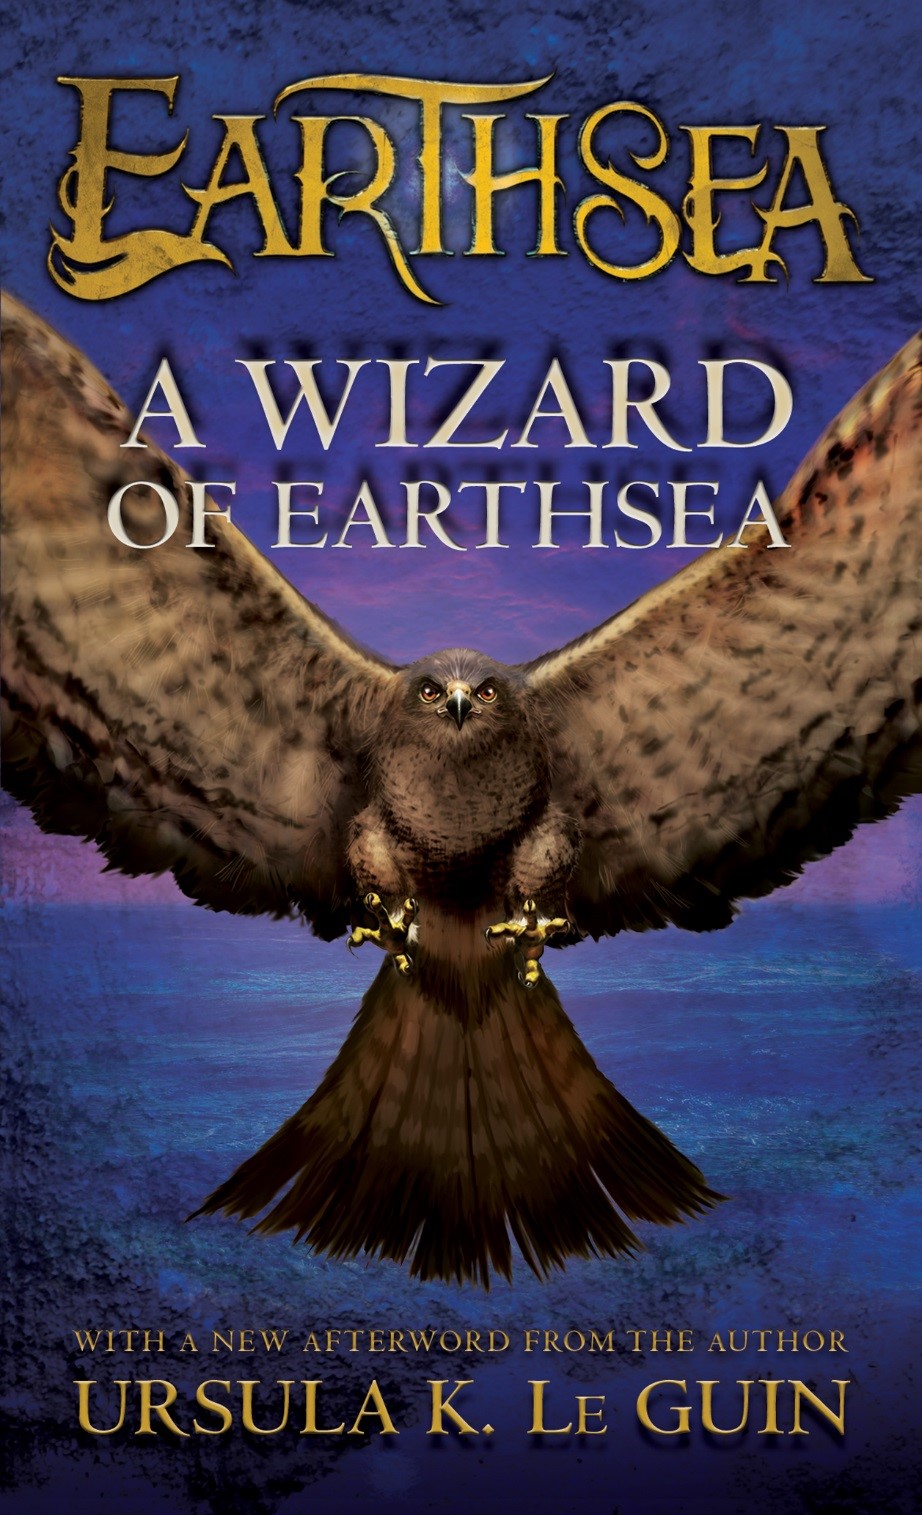 Large elaborate typeface for title and author and an illustration of a menacing eagle flying right towards the reader over a blue forbidding landscape